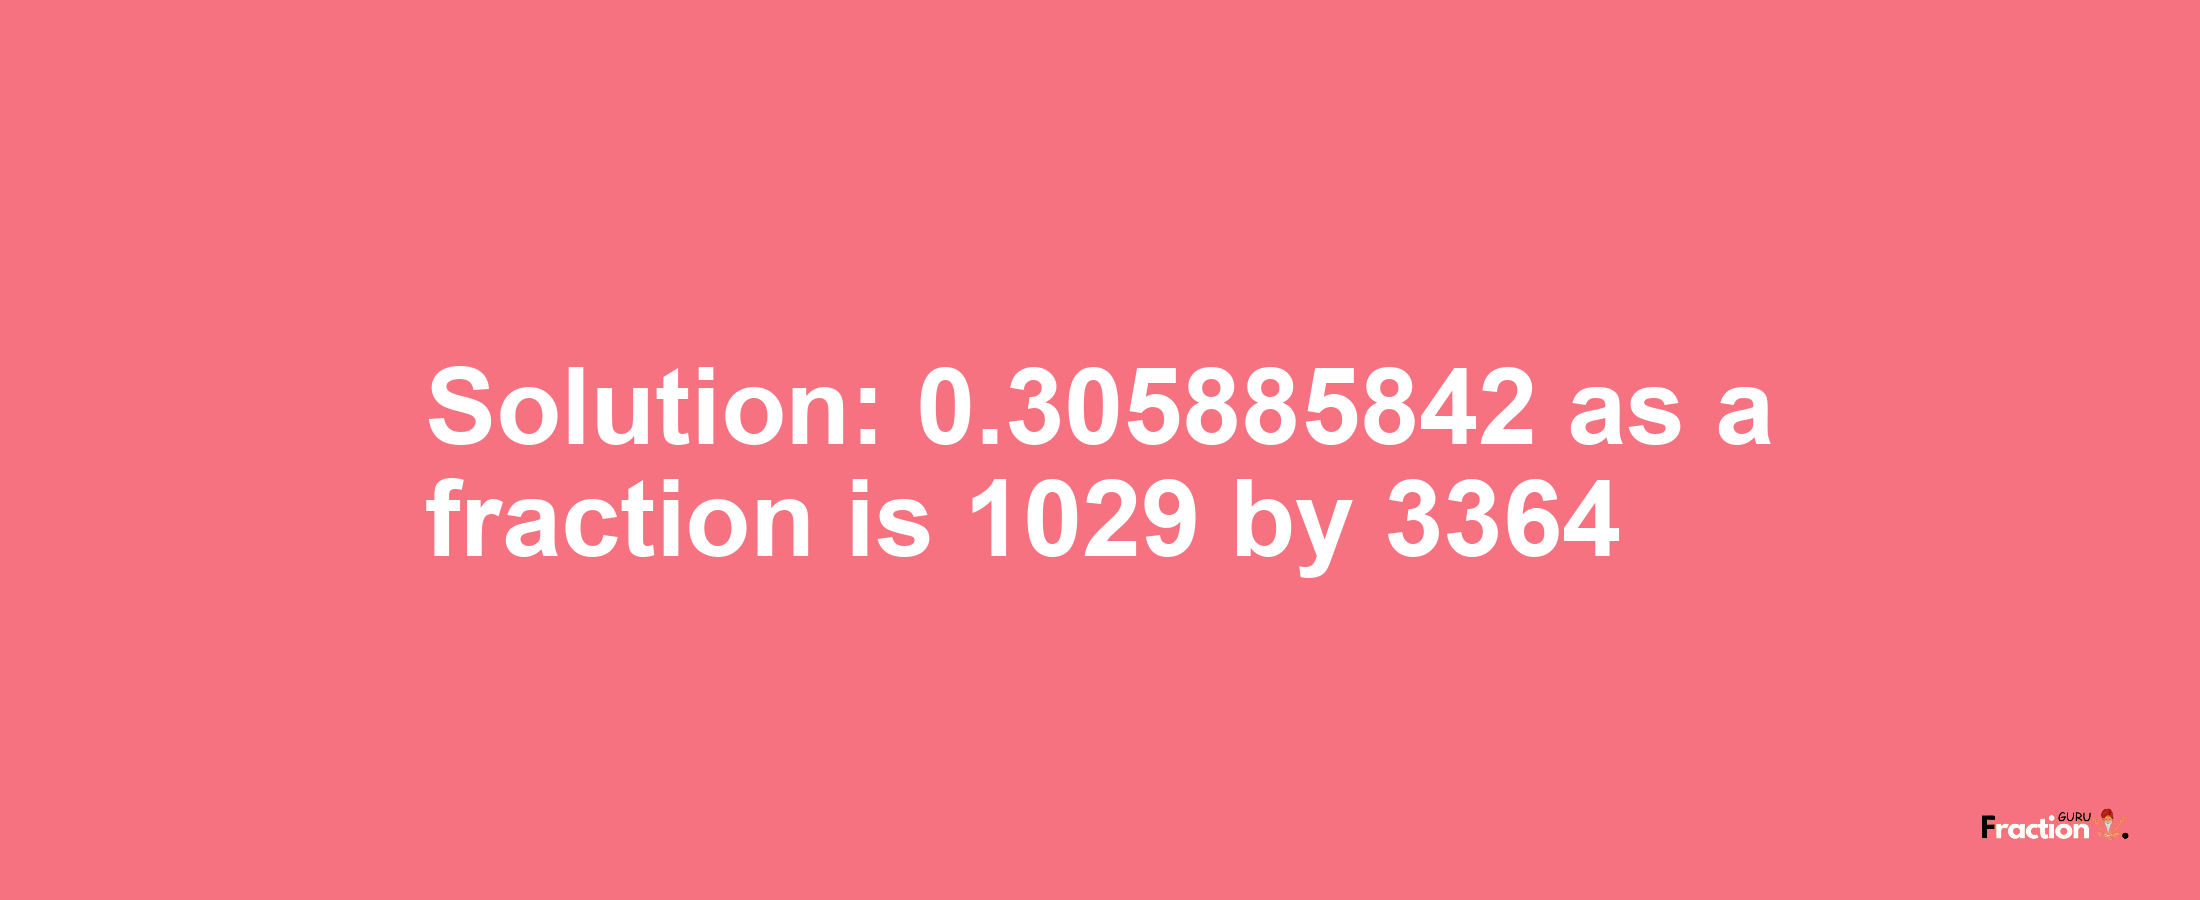 Solution:0.305885842 as a fraction is 1029/3364